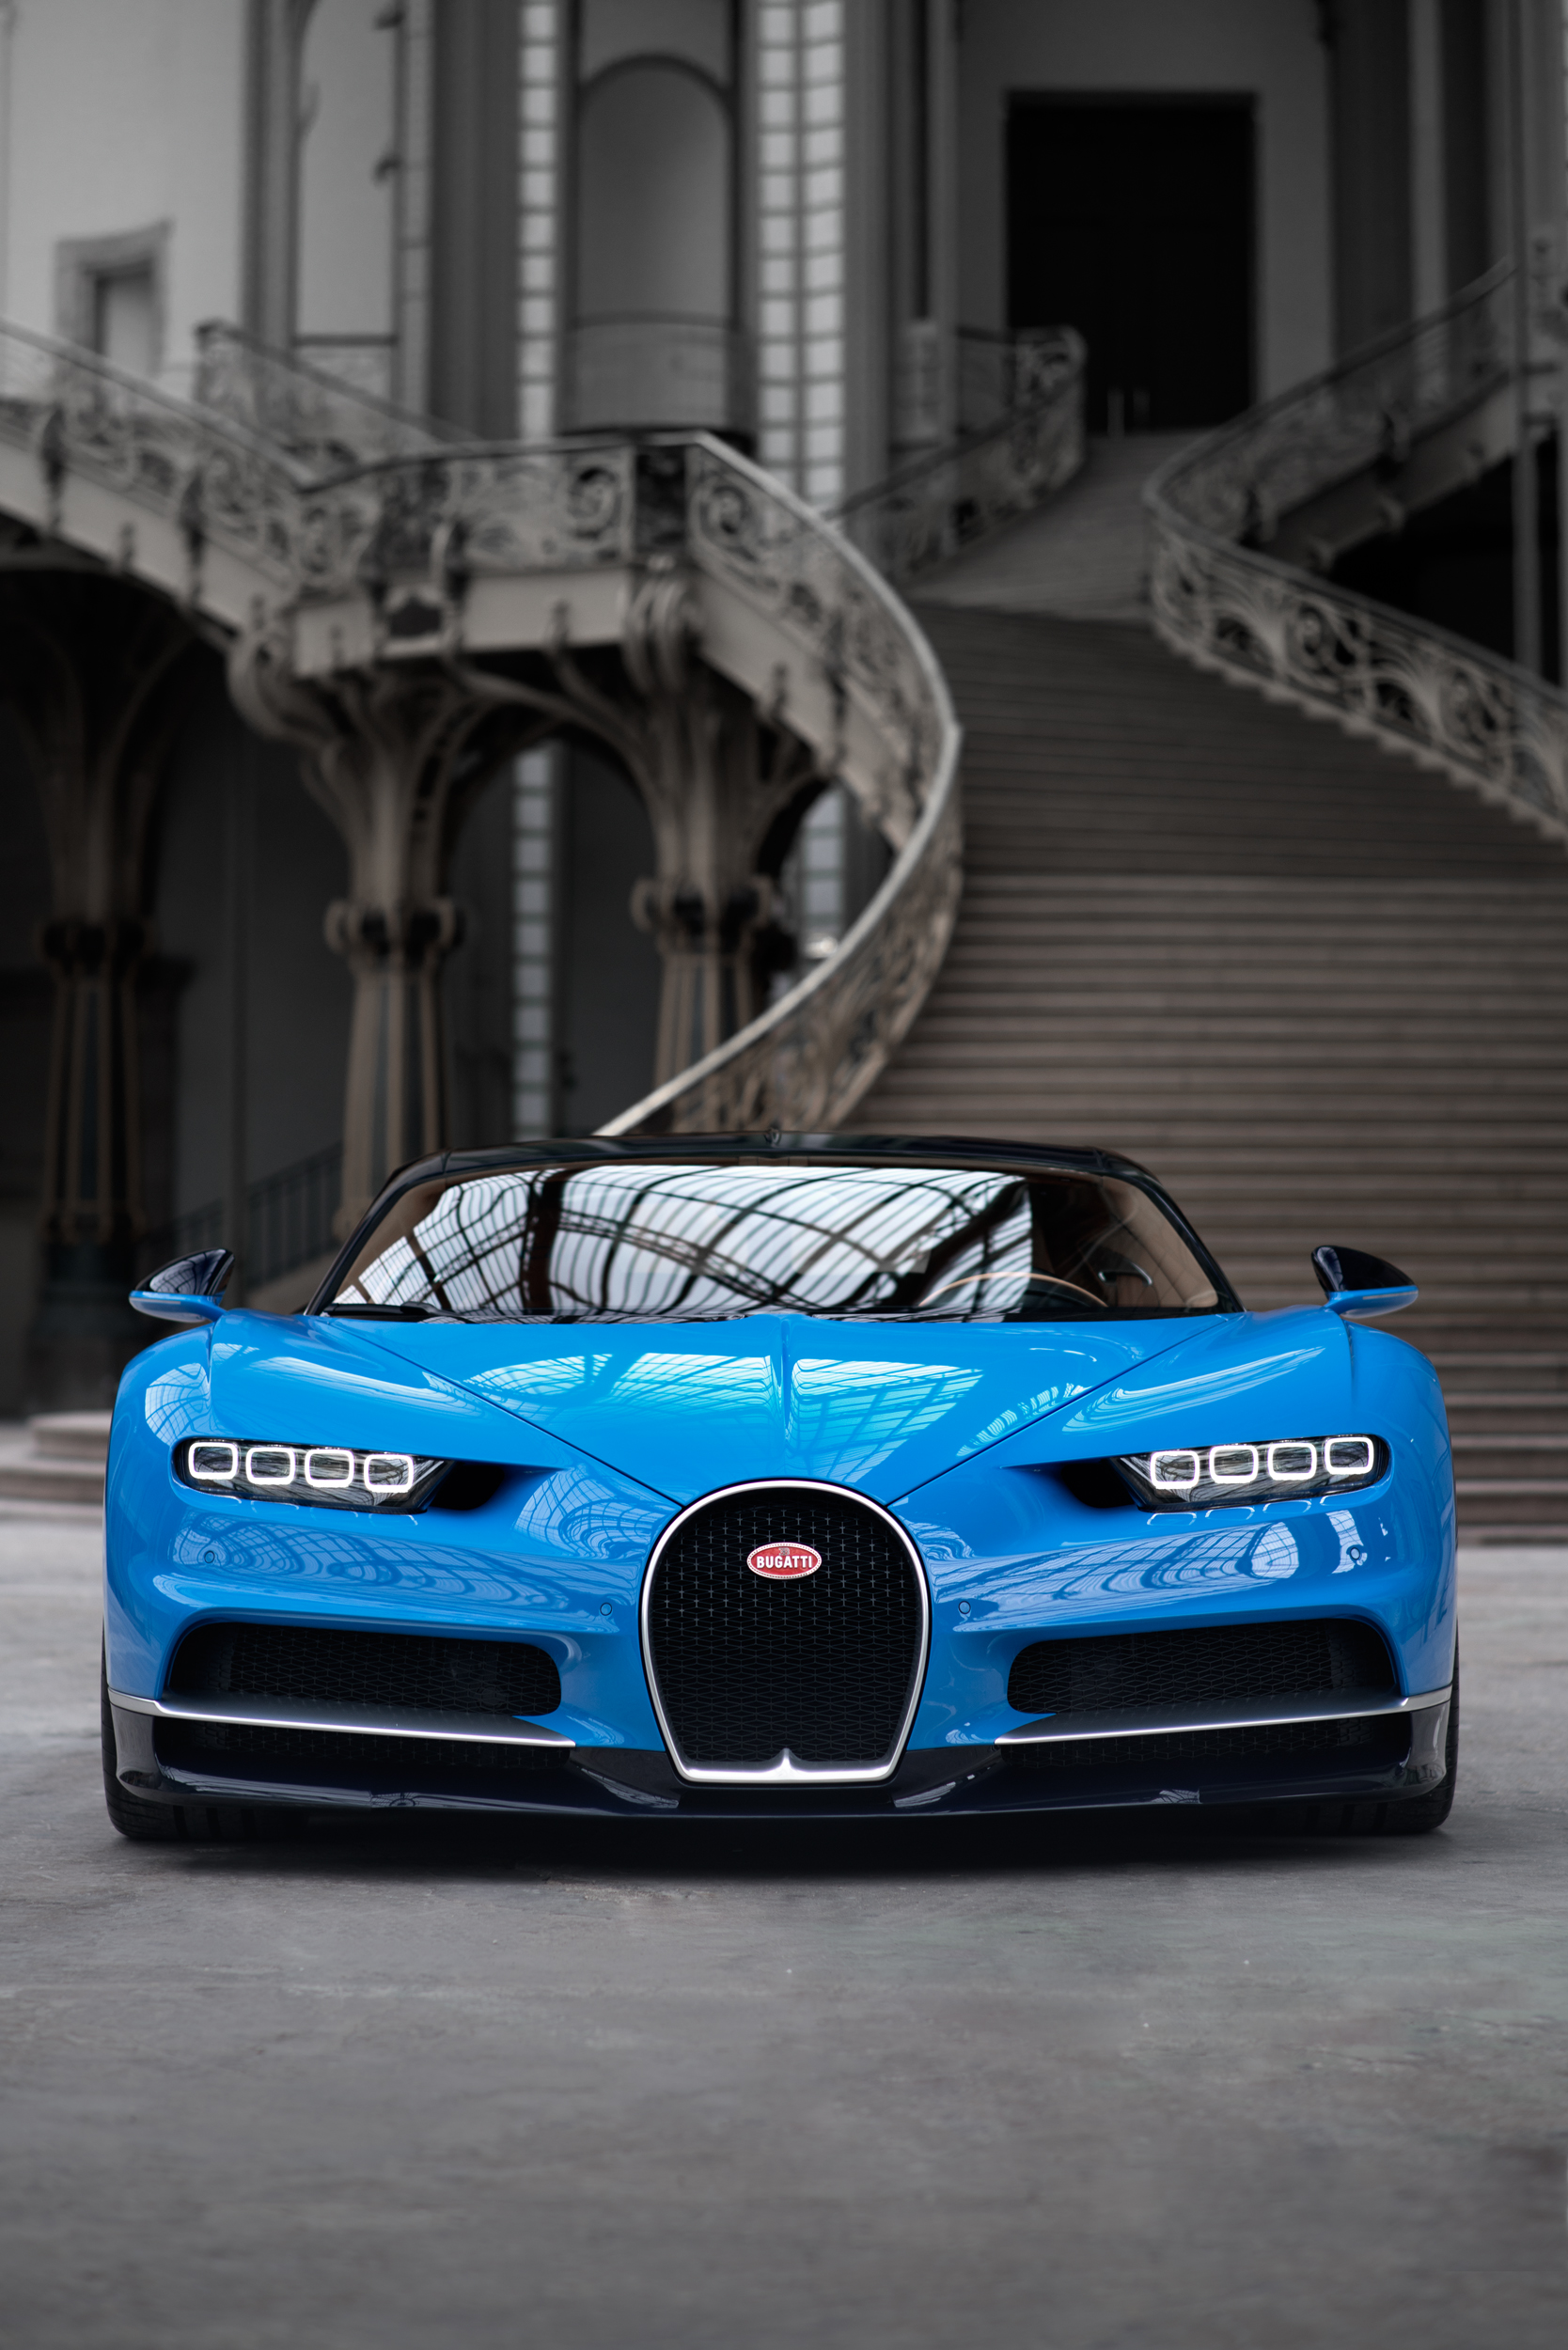 20 mind-blowing facts about the 2016 Bugatti Chiron supercar